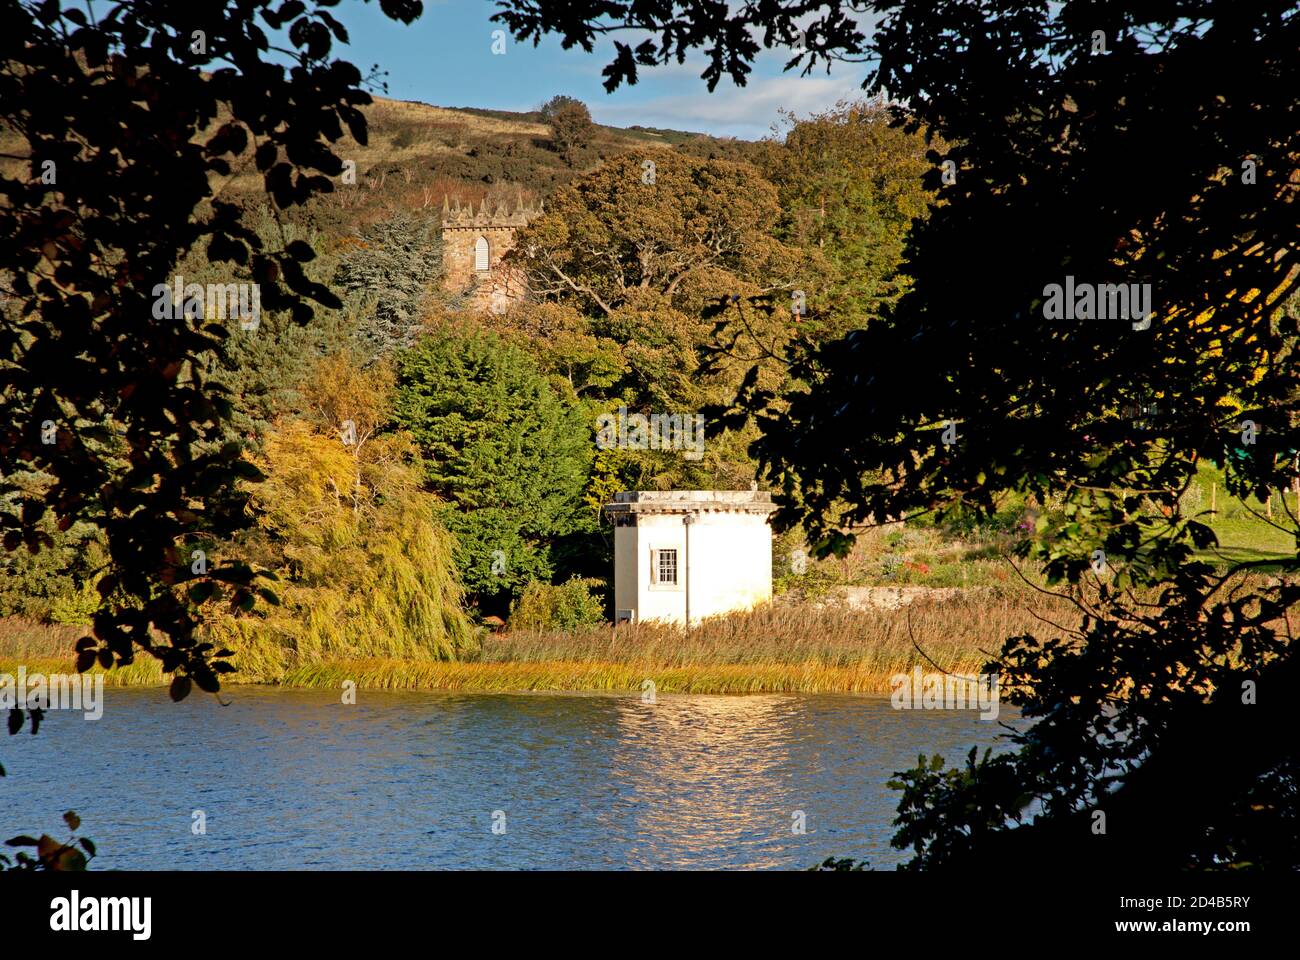 Edinburgh, Scotland, UK. 9 October 2020. Cool temperature of seven degrees  with a breeze, Pictured: Duddingston Loch with the morning sun shining on  Thomson's Tower in mid ground and Duddingston Kirk nestled